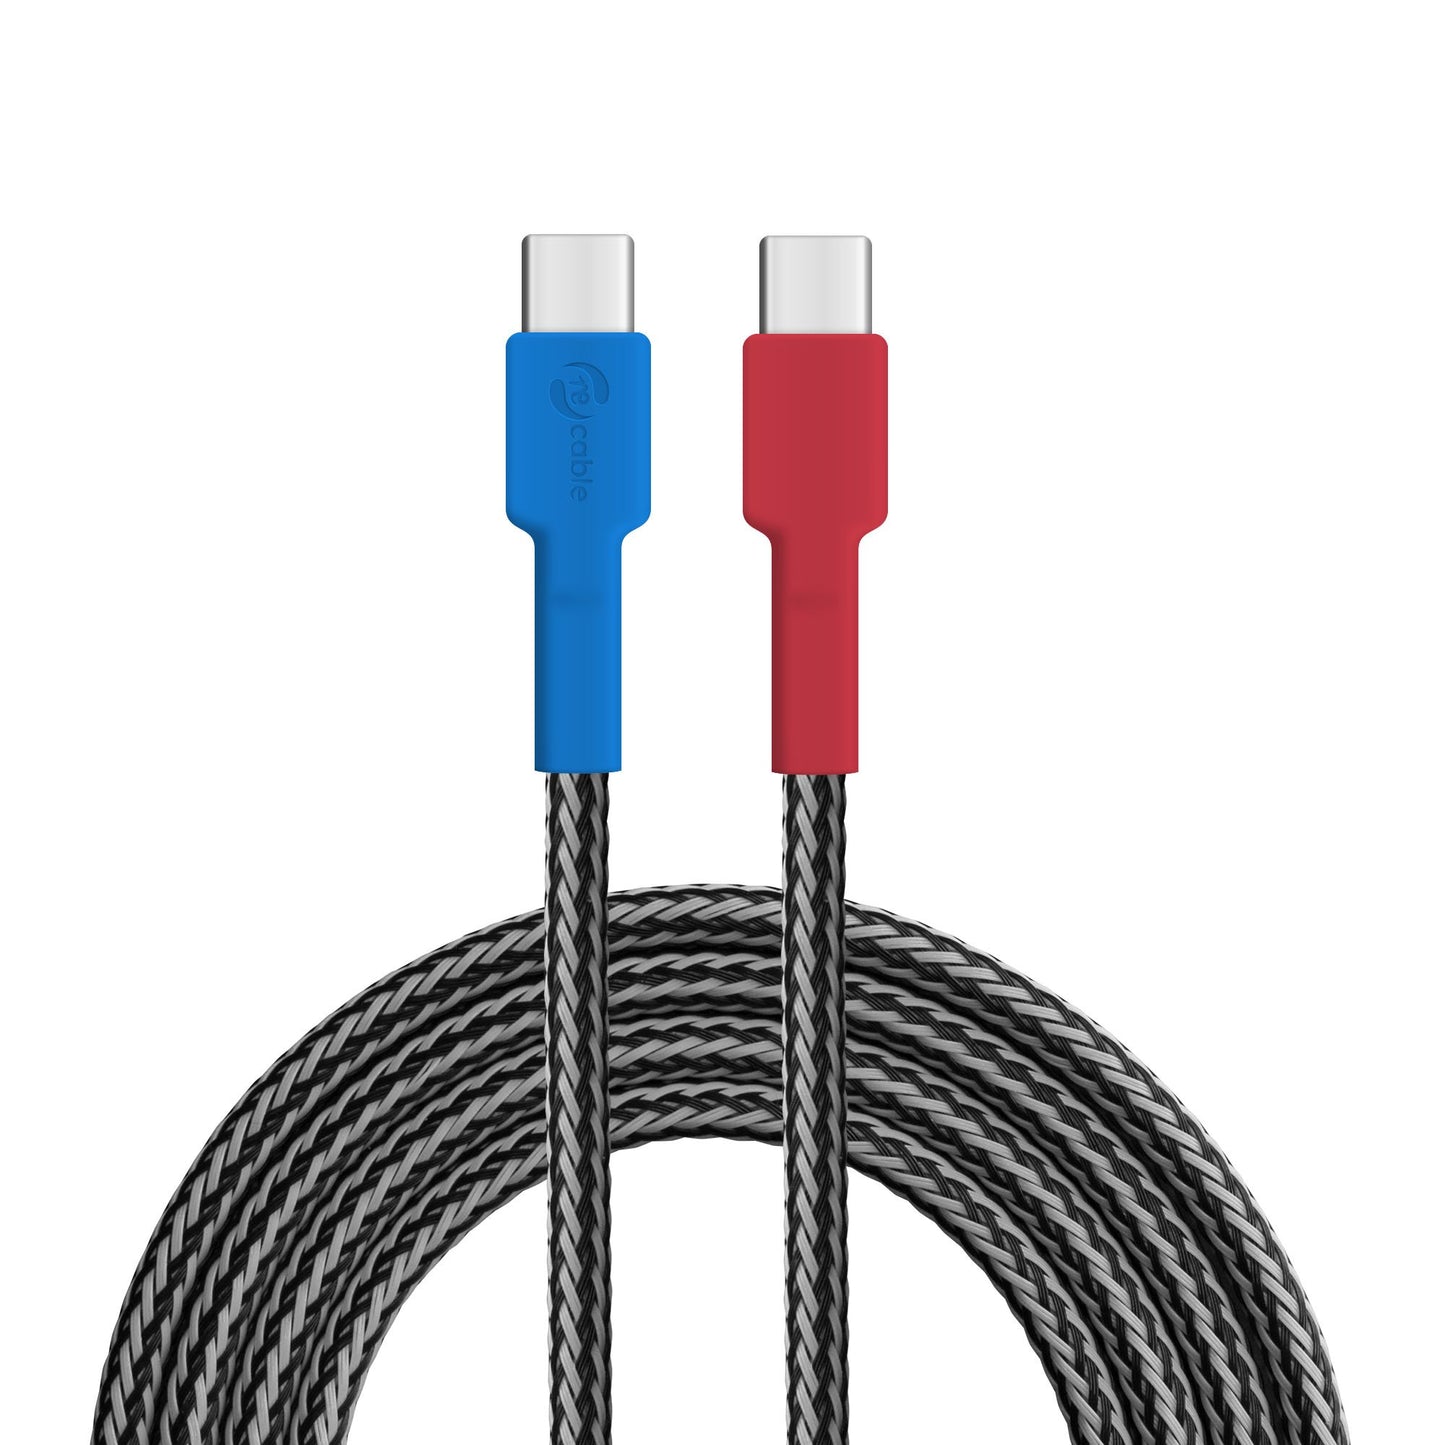 USB cable, Design: Cassowary, Connections: USB C on USB C